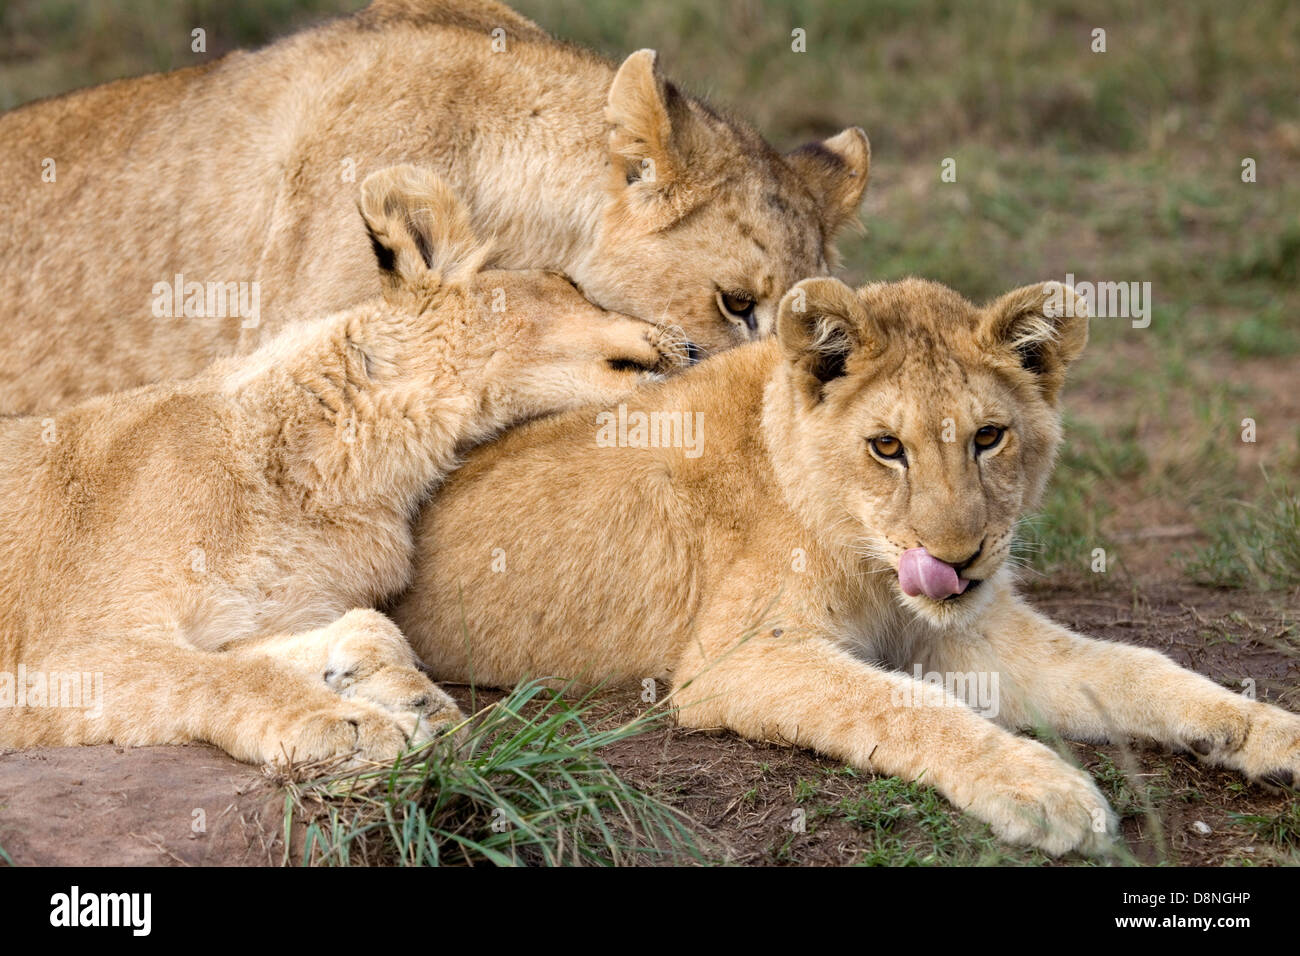 Three lion cubs resting, Cape town, South Africa. Stock Photo